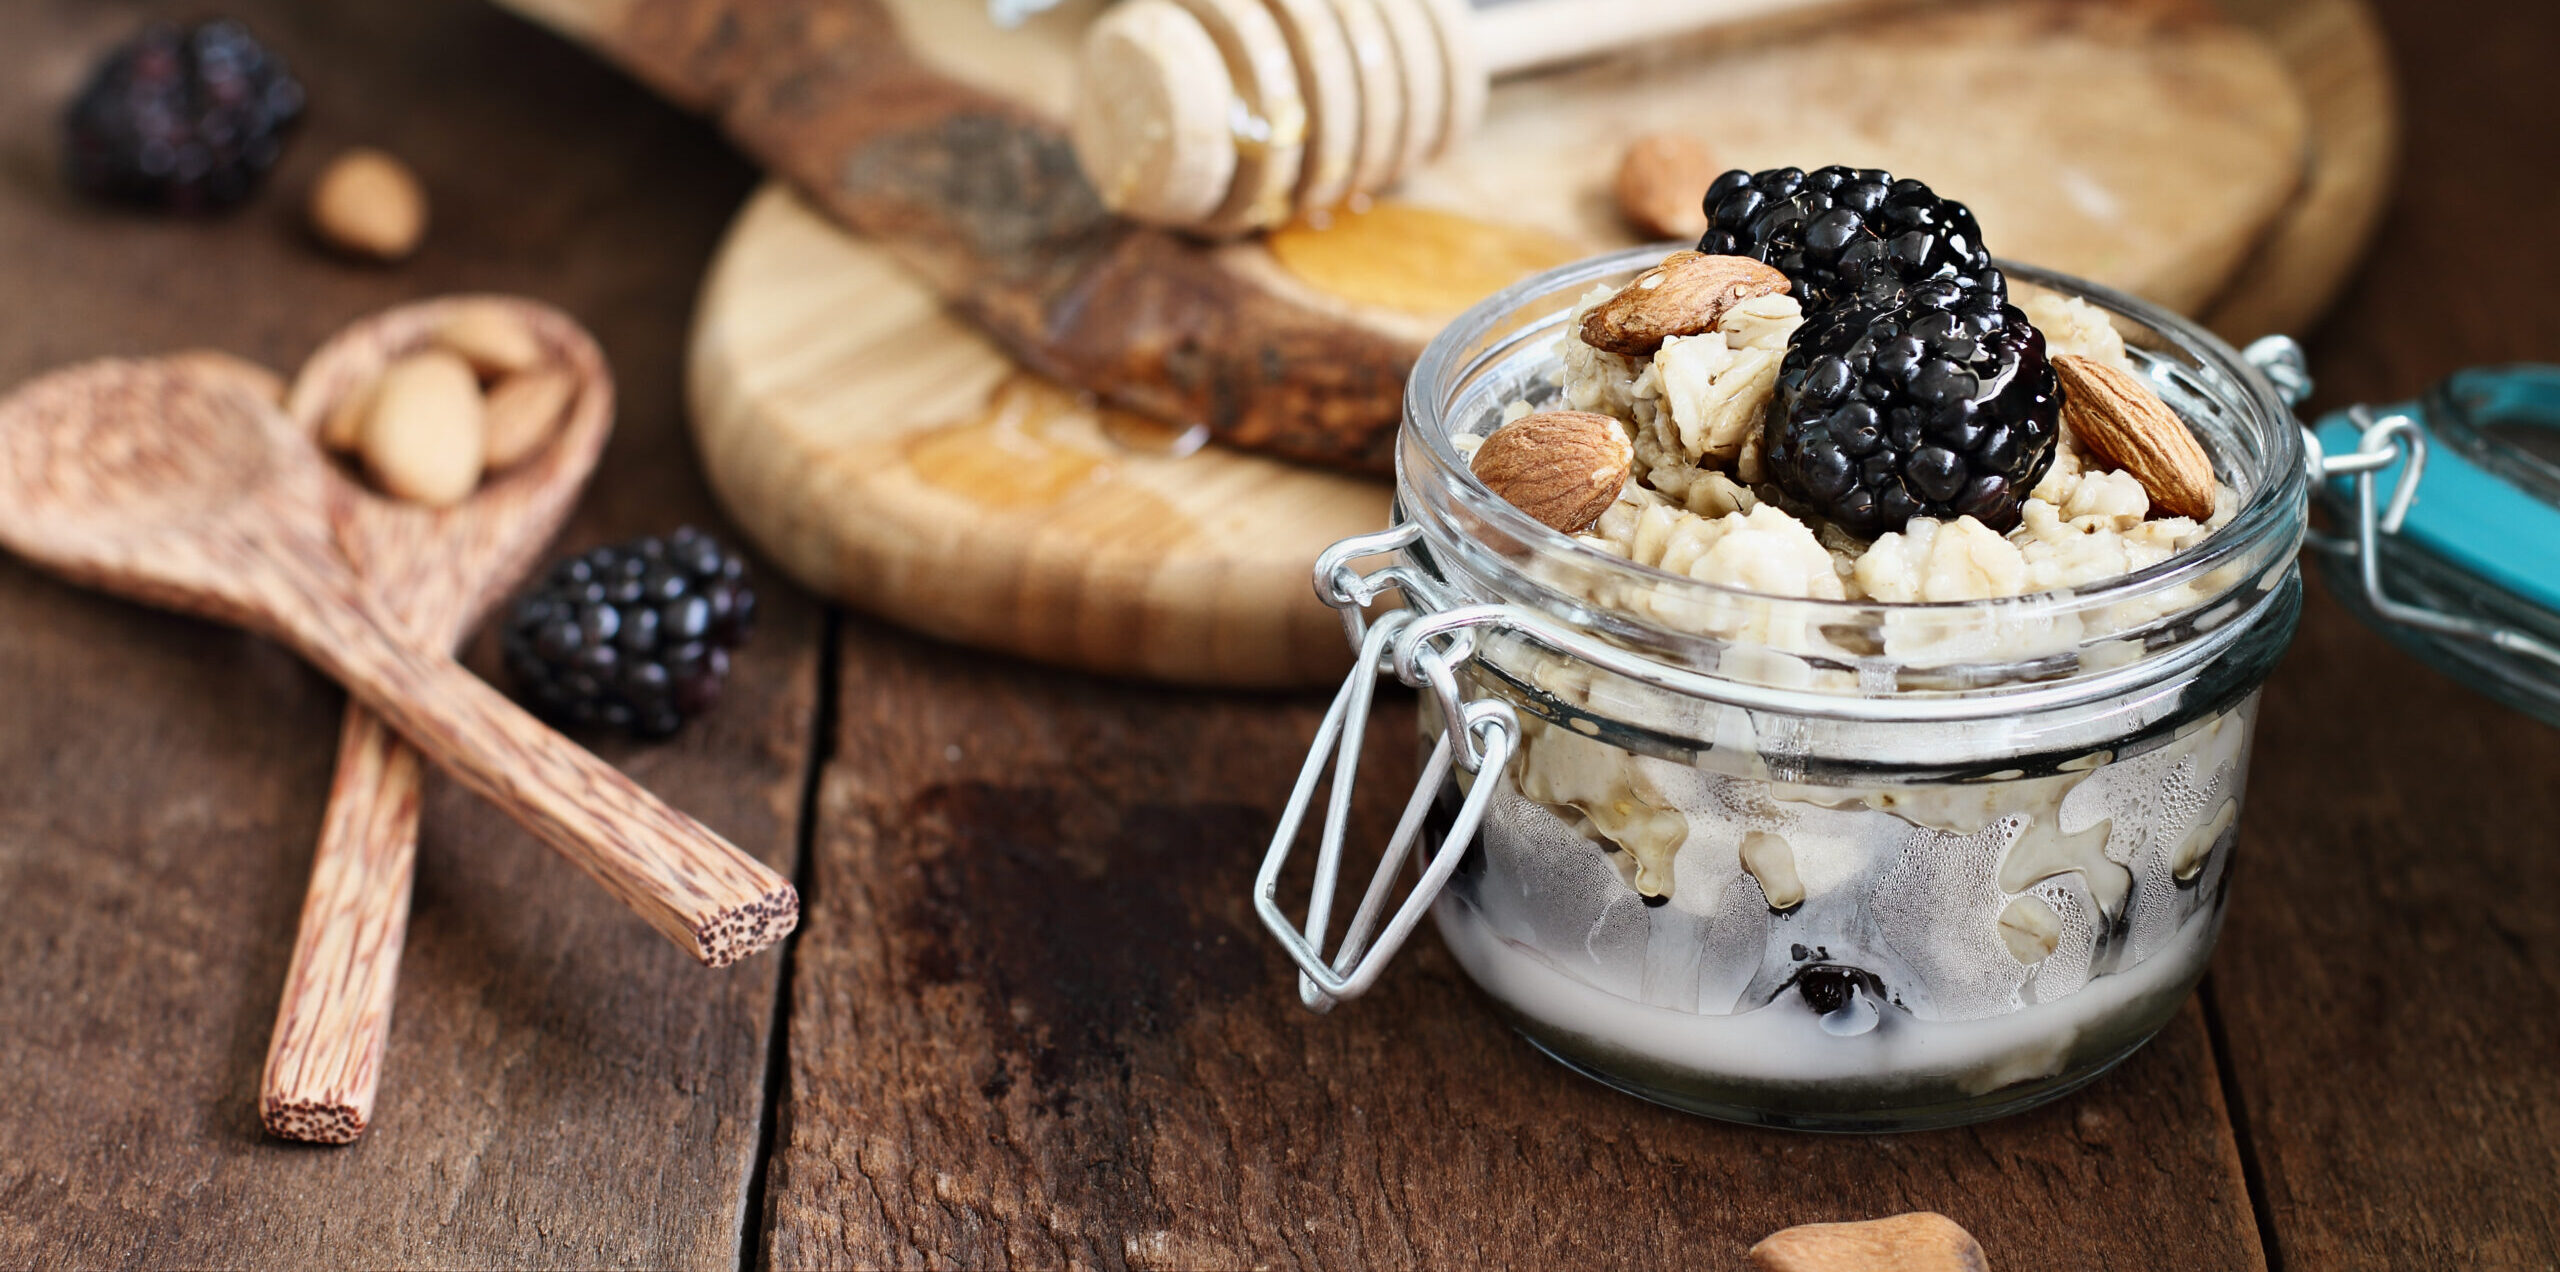 ✓ Best Container For Overnight Oats In 2023 ✨ Top 5 Tested & Buying Guide 